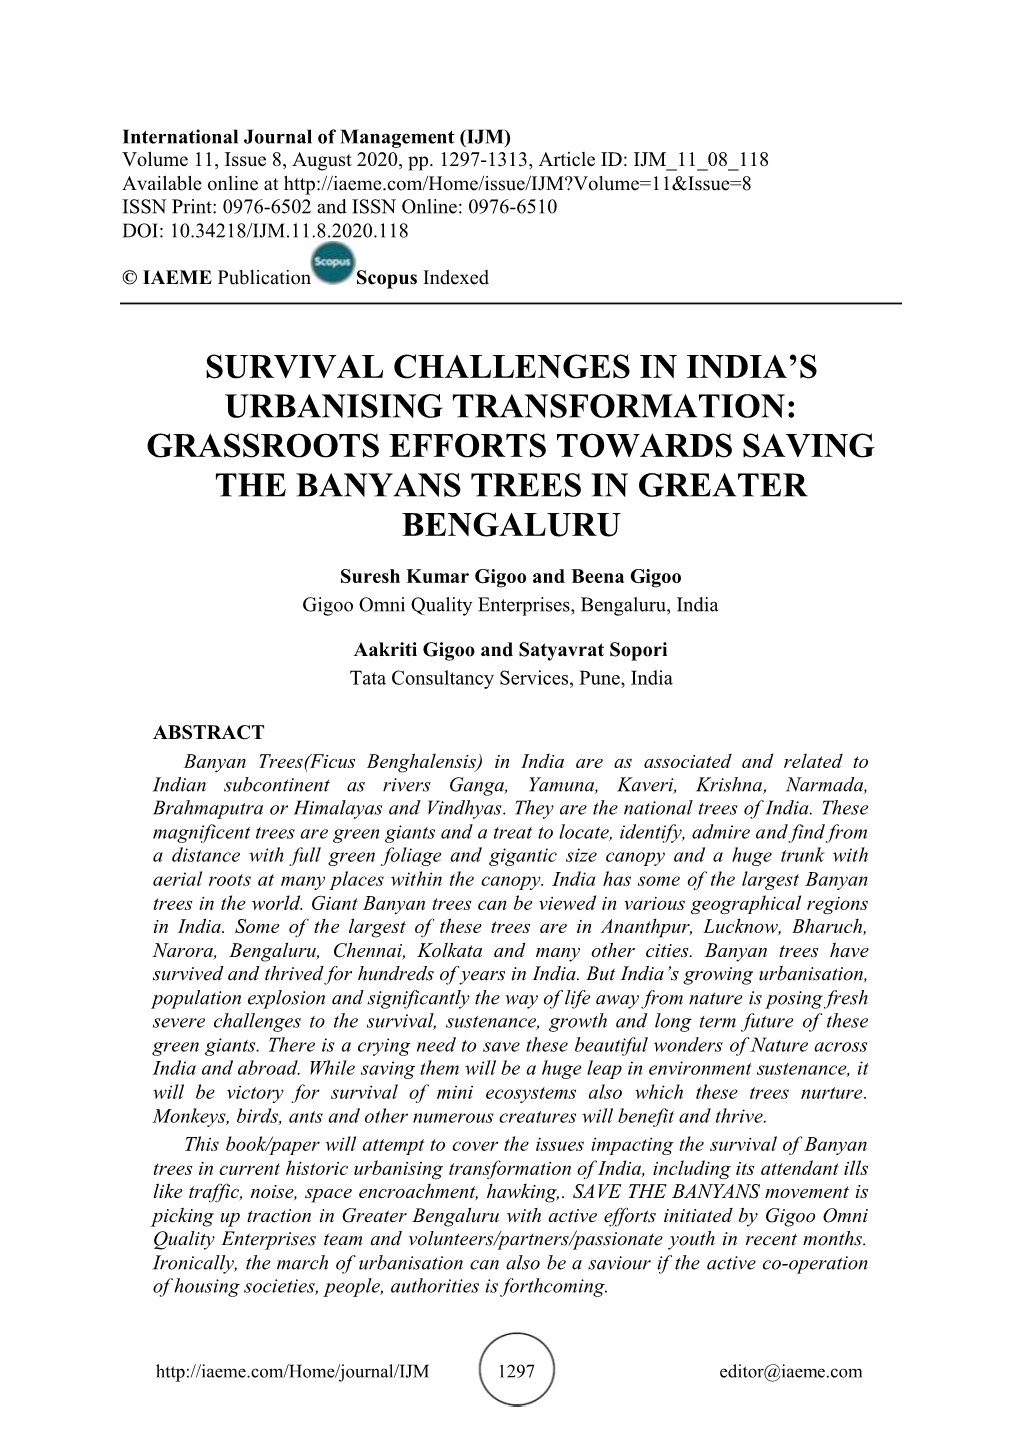 Survival Challenges in India's Urbanising Transformation